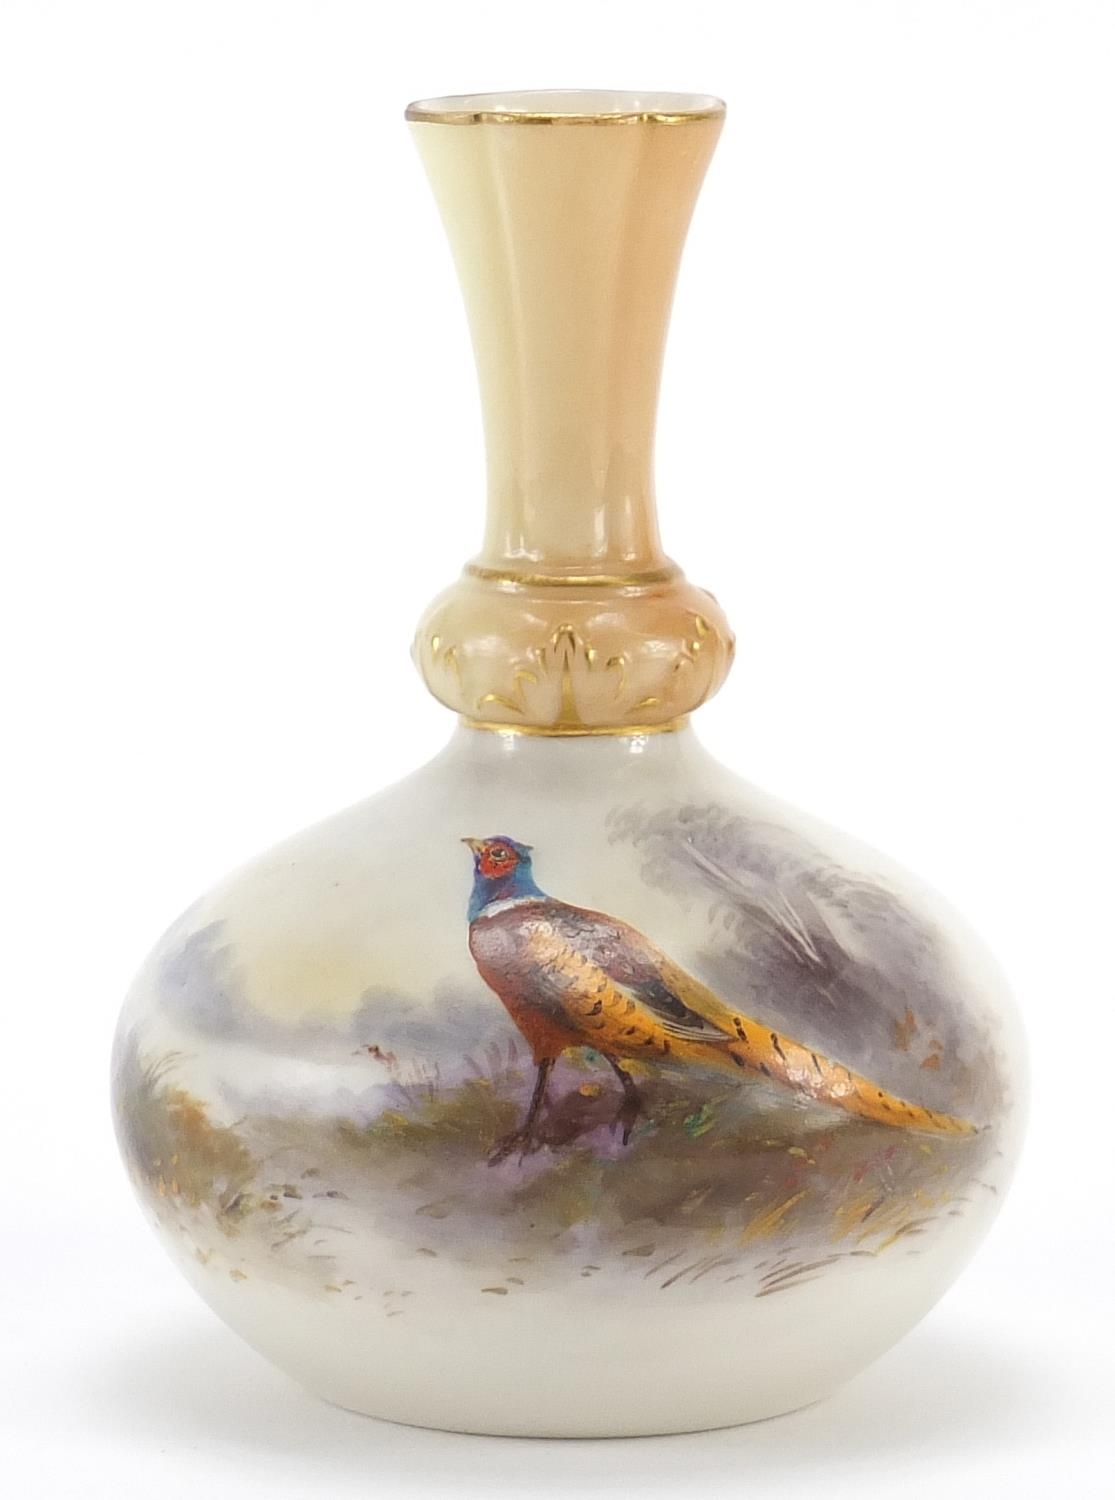 Royal Worcester porcelain vase hand painted with a pheasant, 12.5cm high